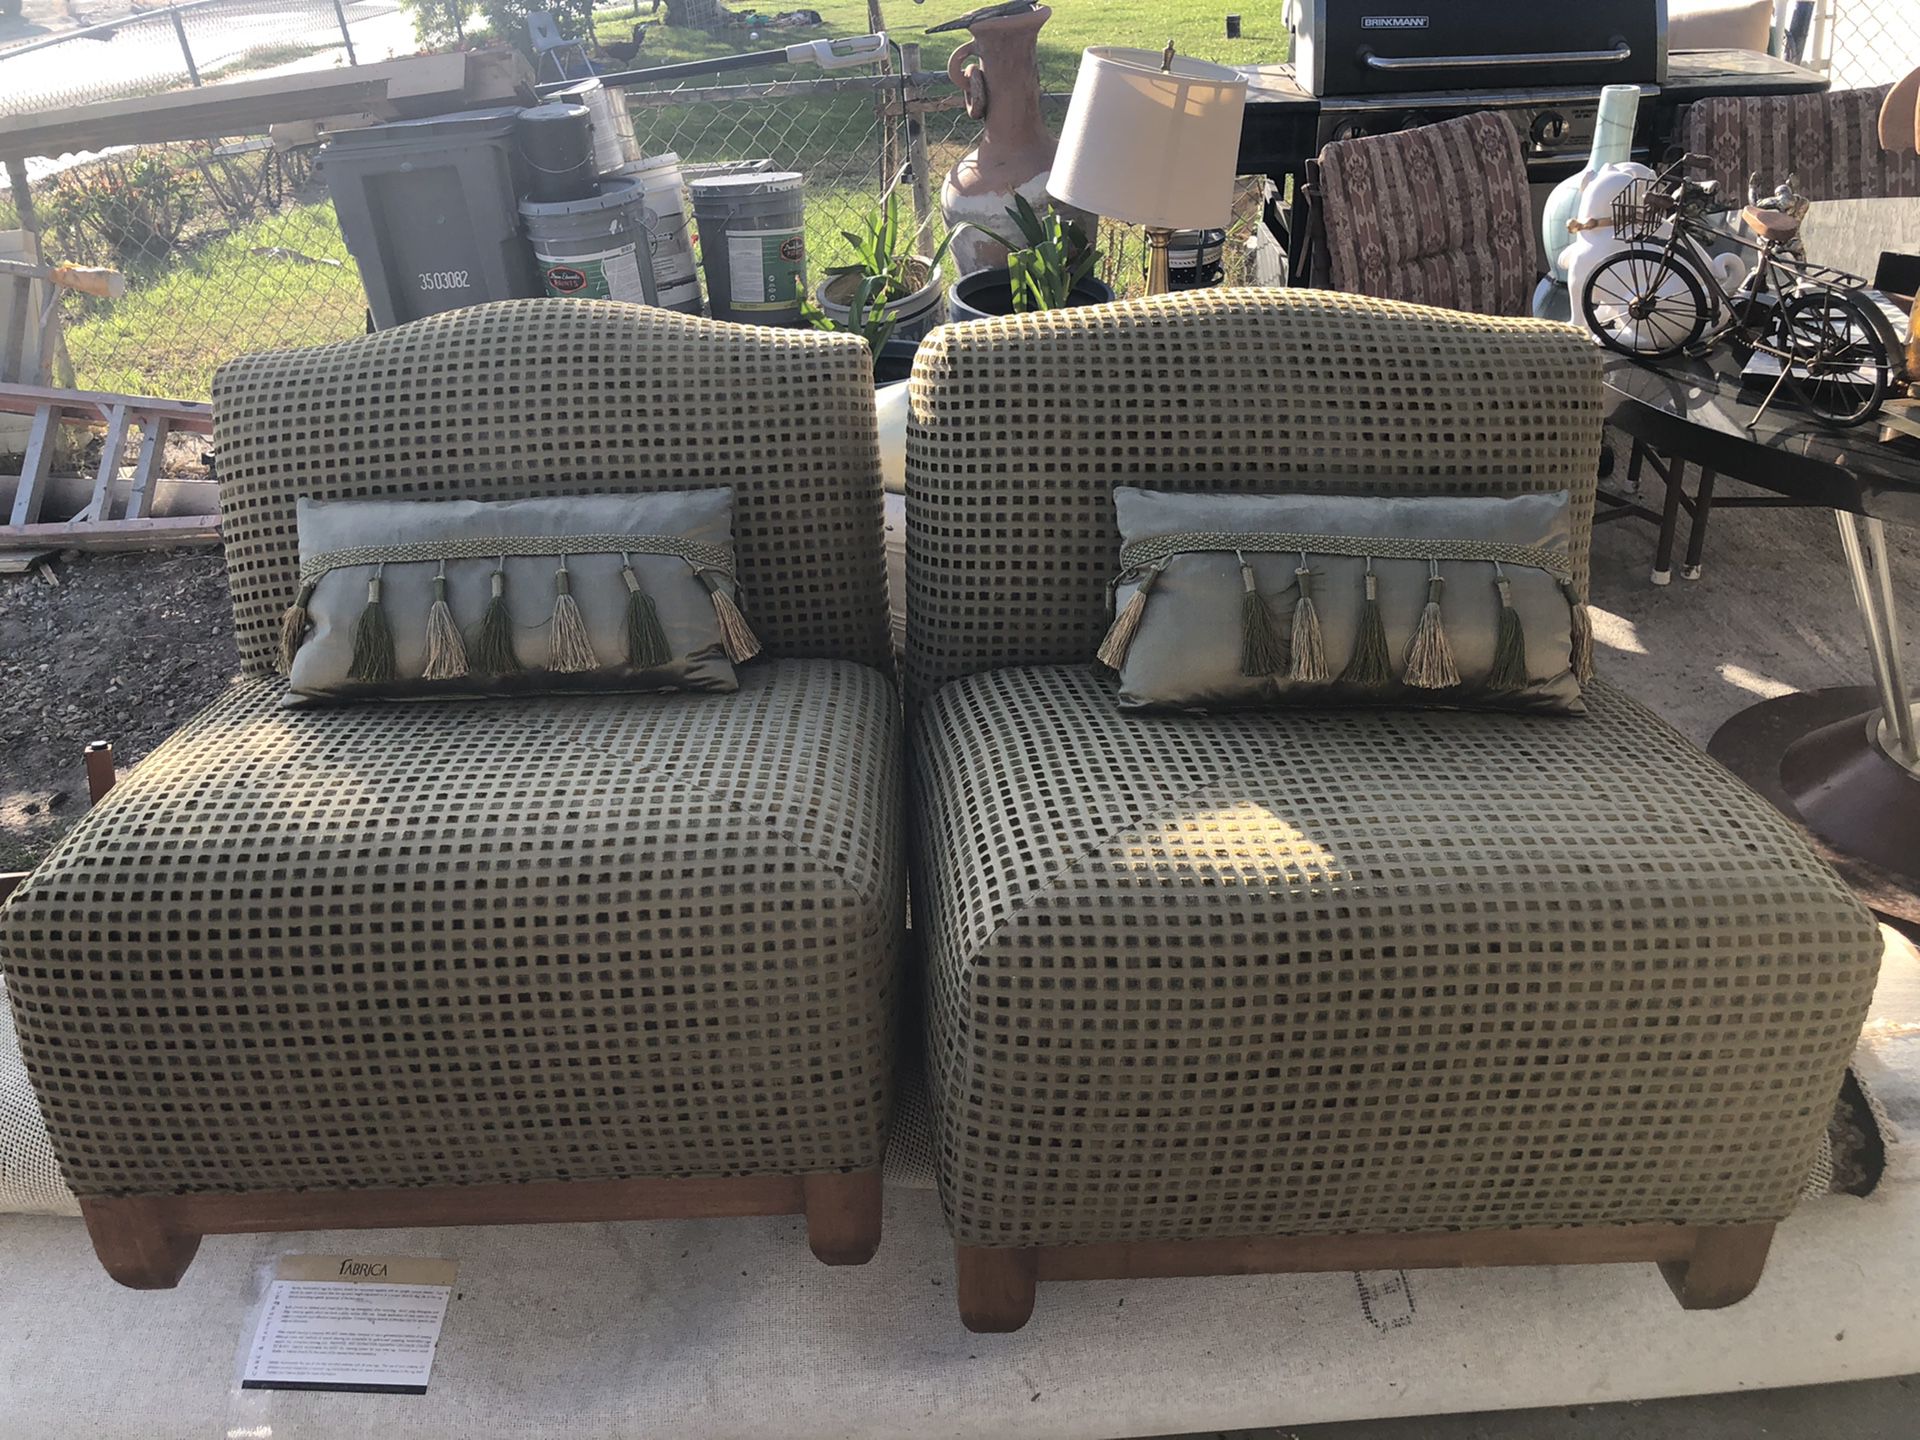 2 green individual sofas with small pillows